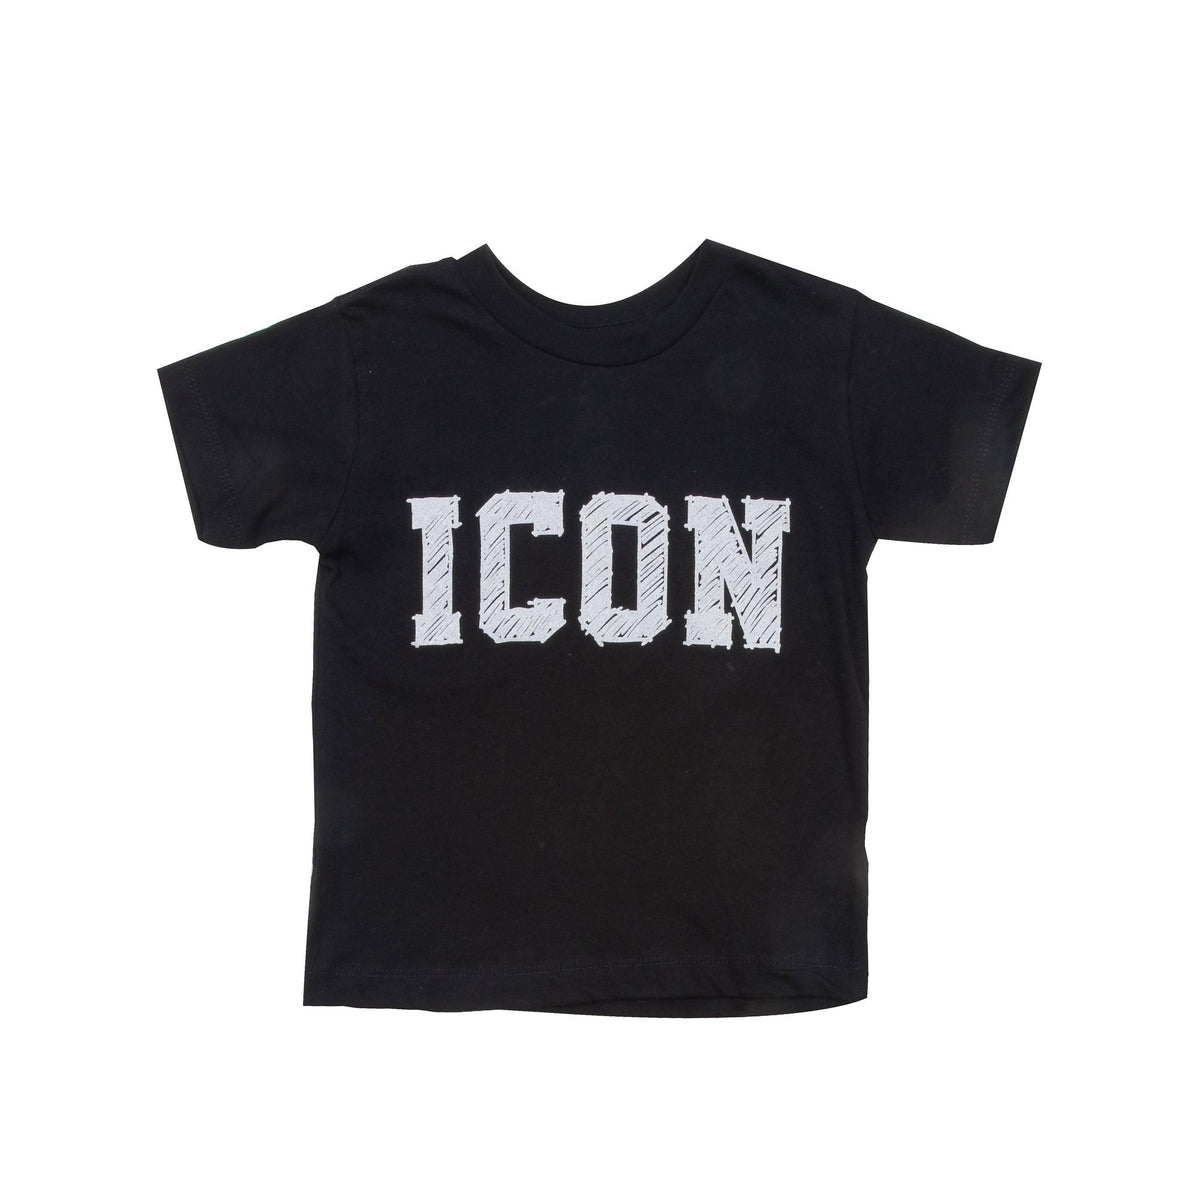 Portage and Main | Children's Unisex ICON Graphic Black Tee - All Things Dylan